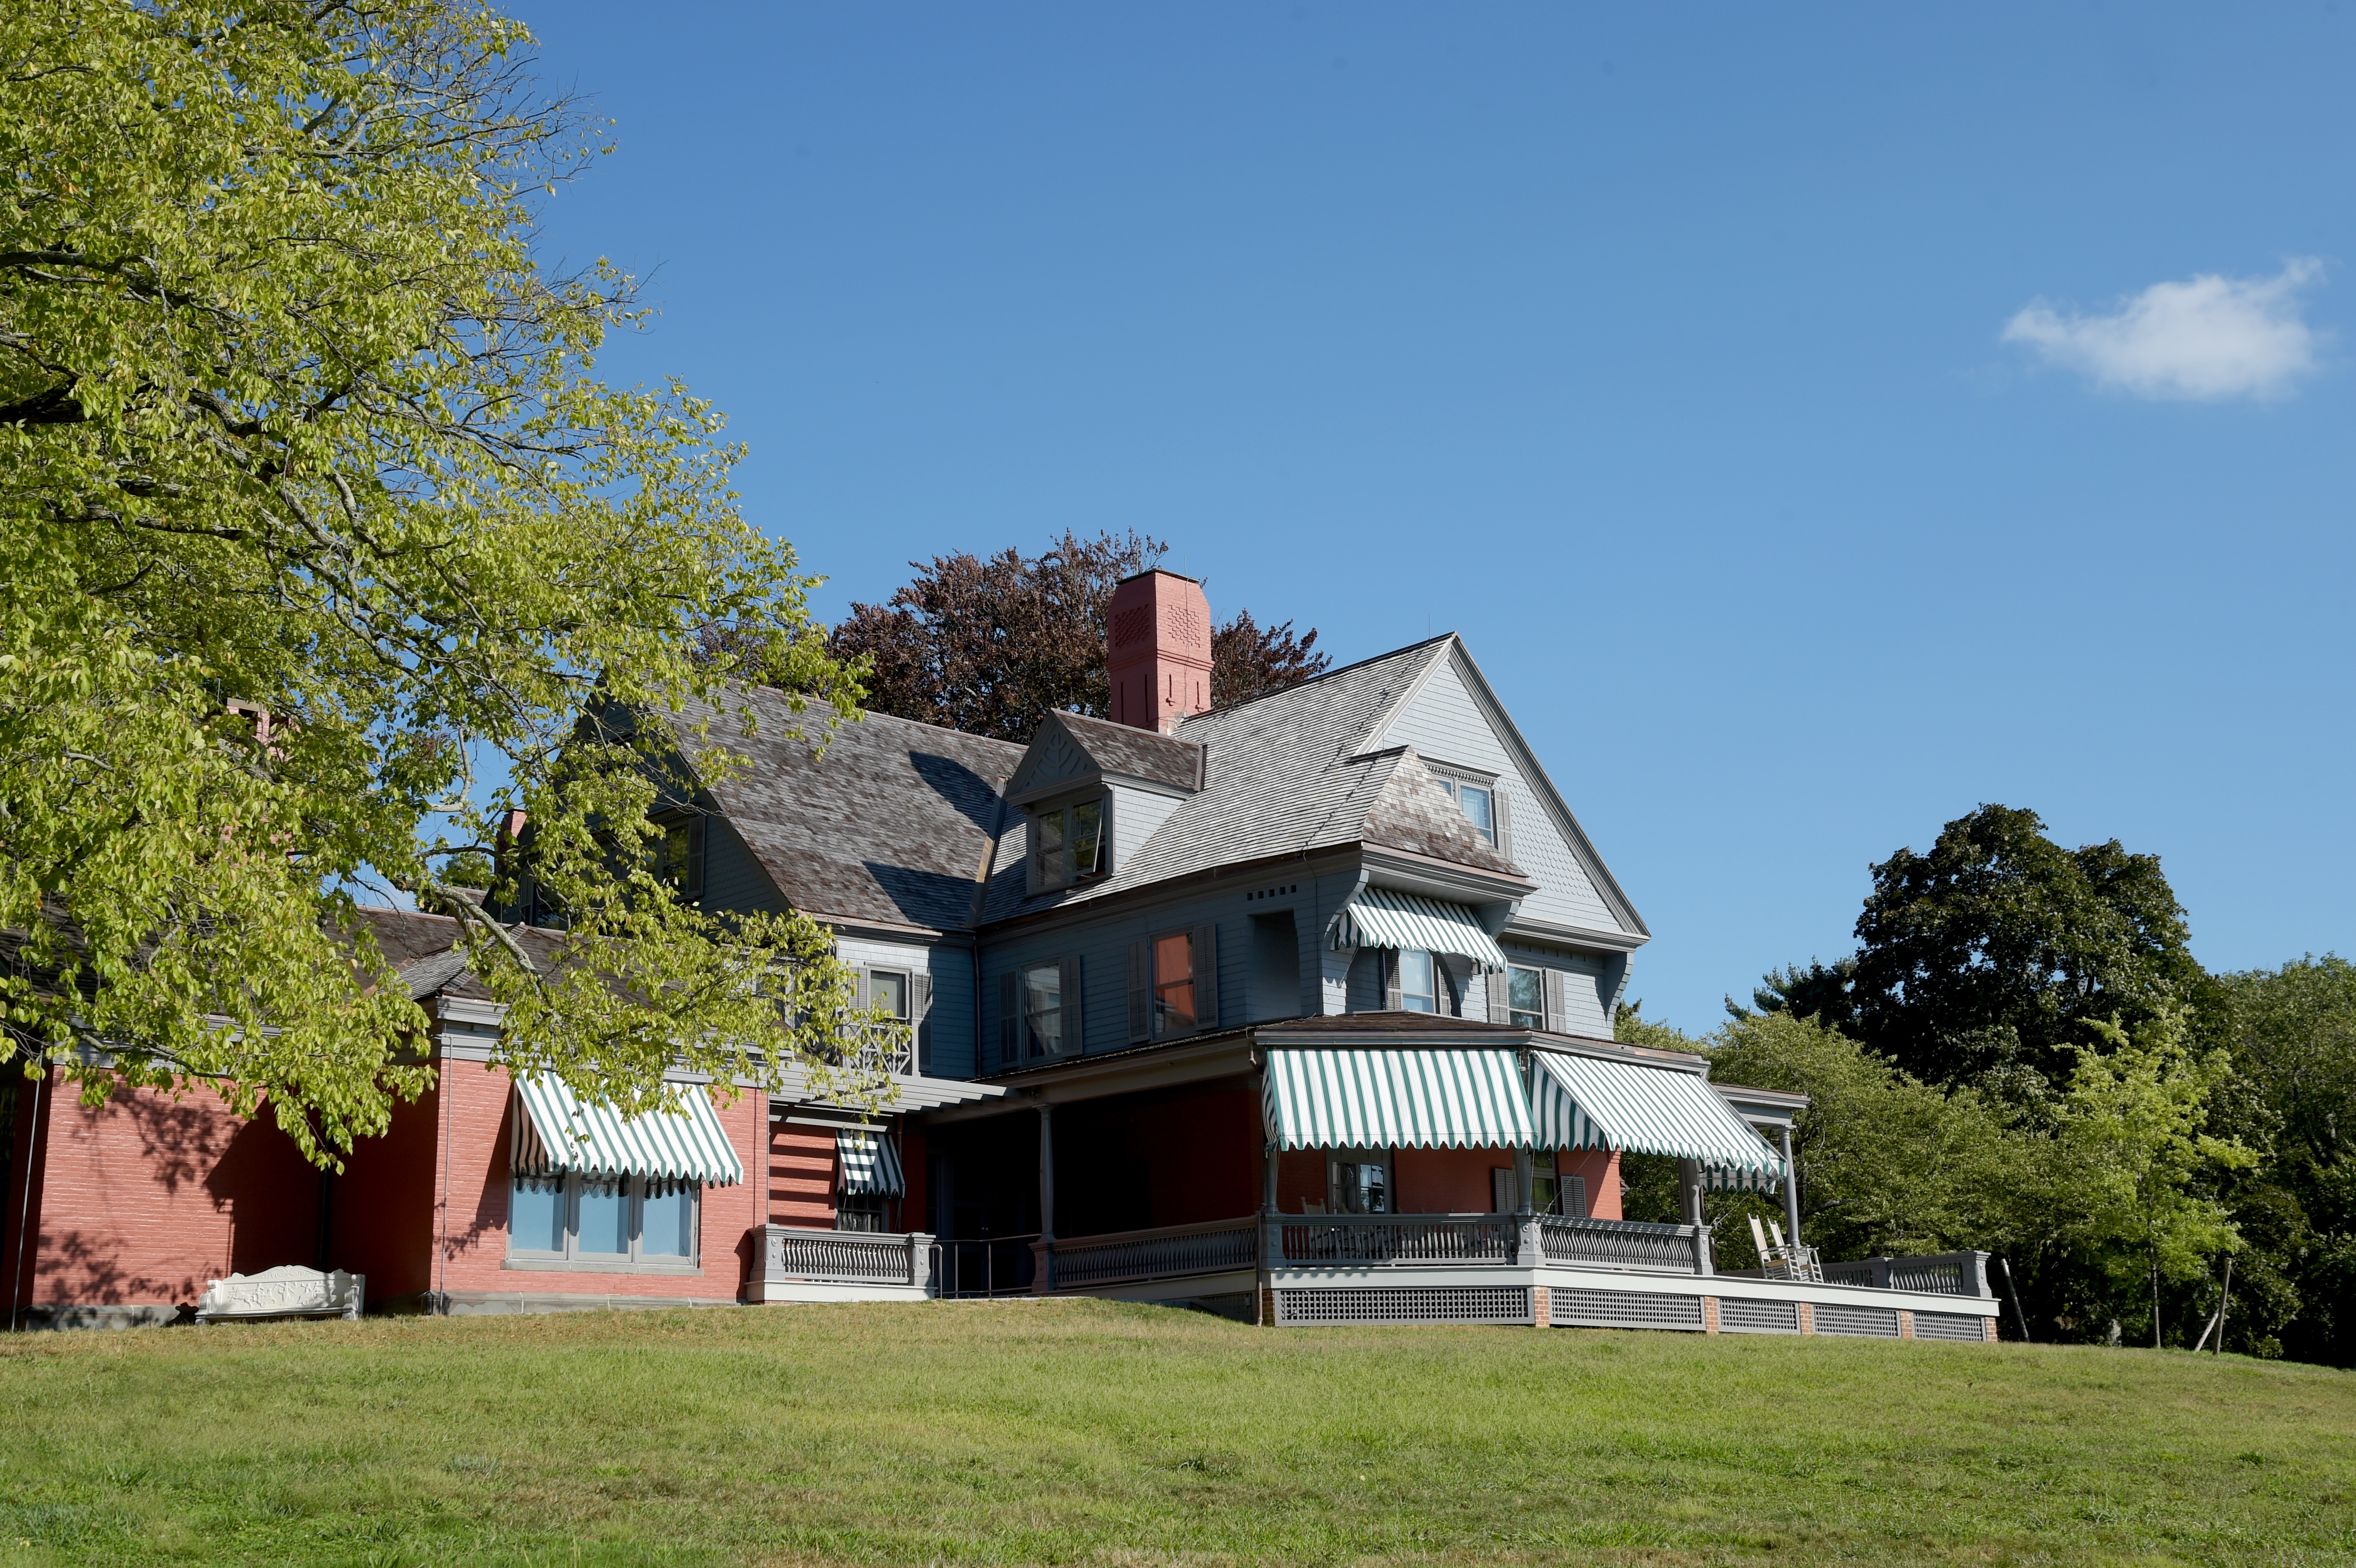 Exterior of Theodore Roosevelt Home. Image: ©Audrey C. Tiernan Photography, Inc.